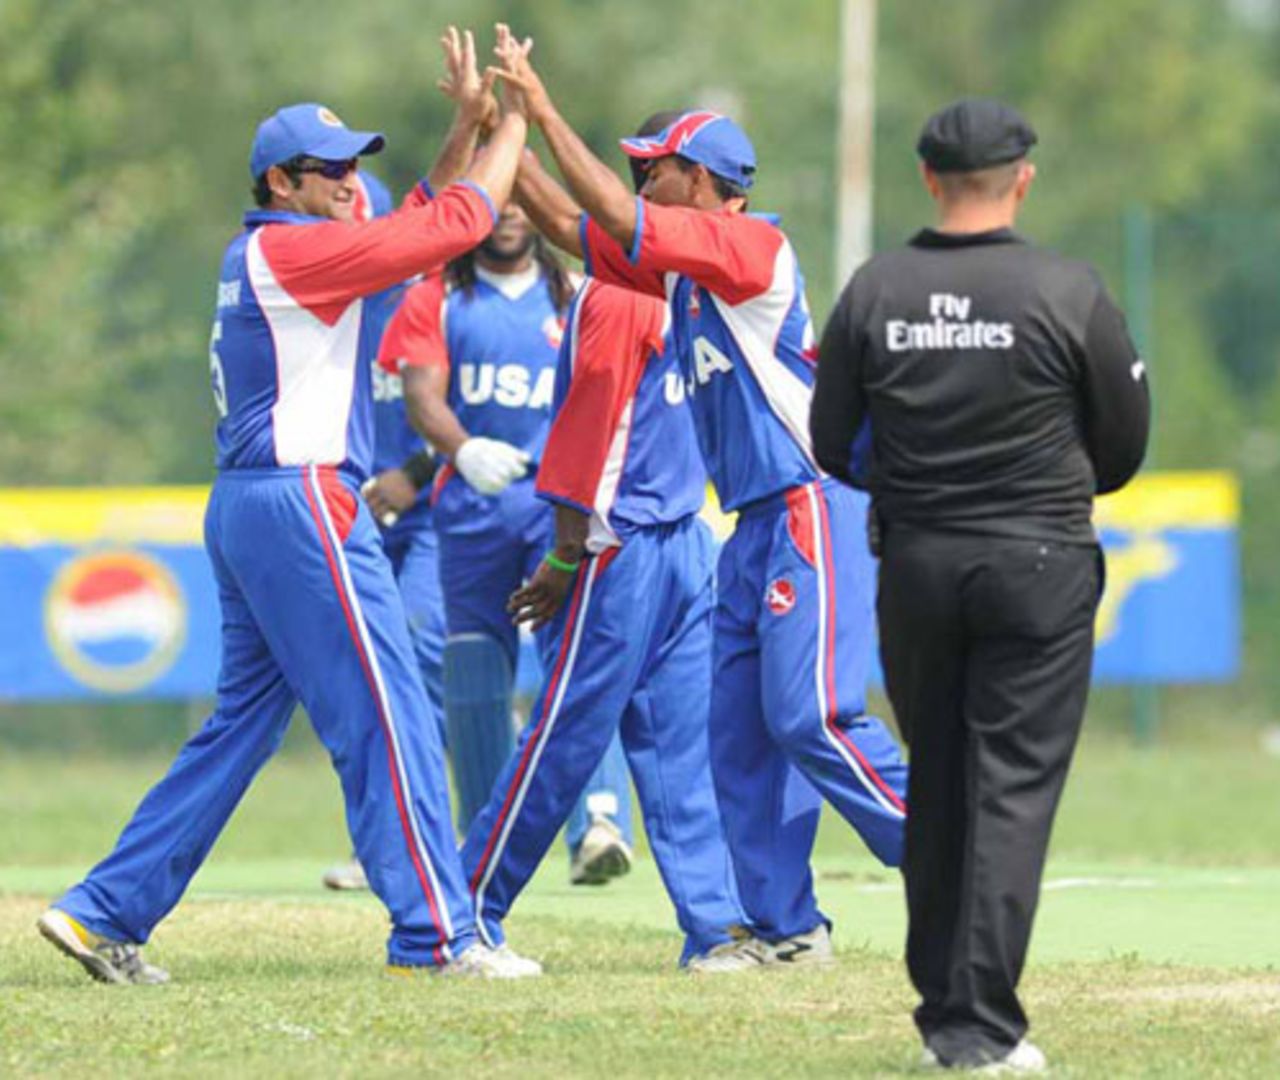 USA celebrate the dismissal of Alessandro Bonora, Italy v USA, ICC WCL Div. 4 final, Pianoro, August 21, 2010